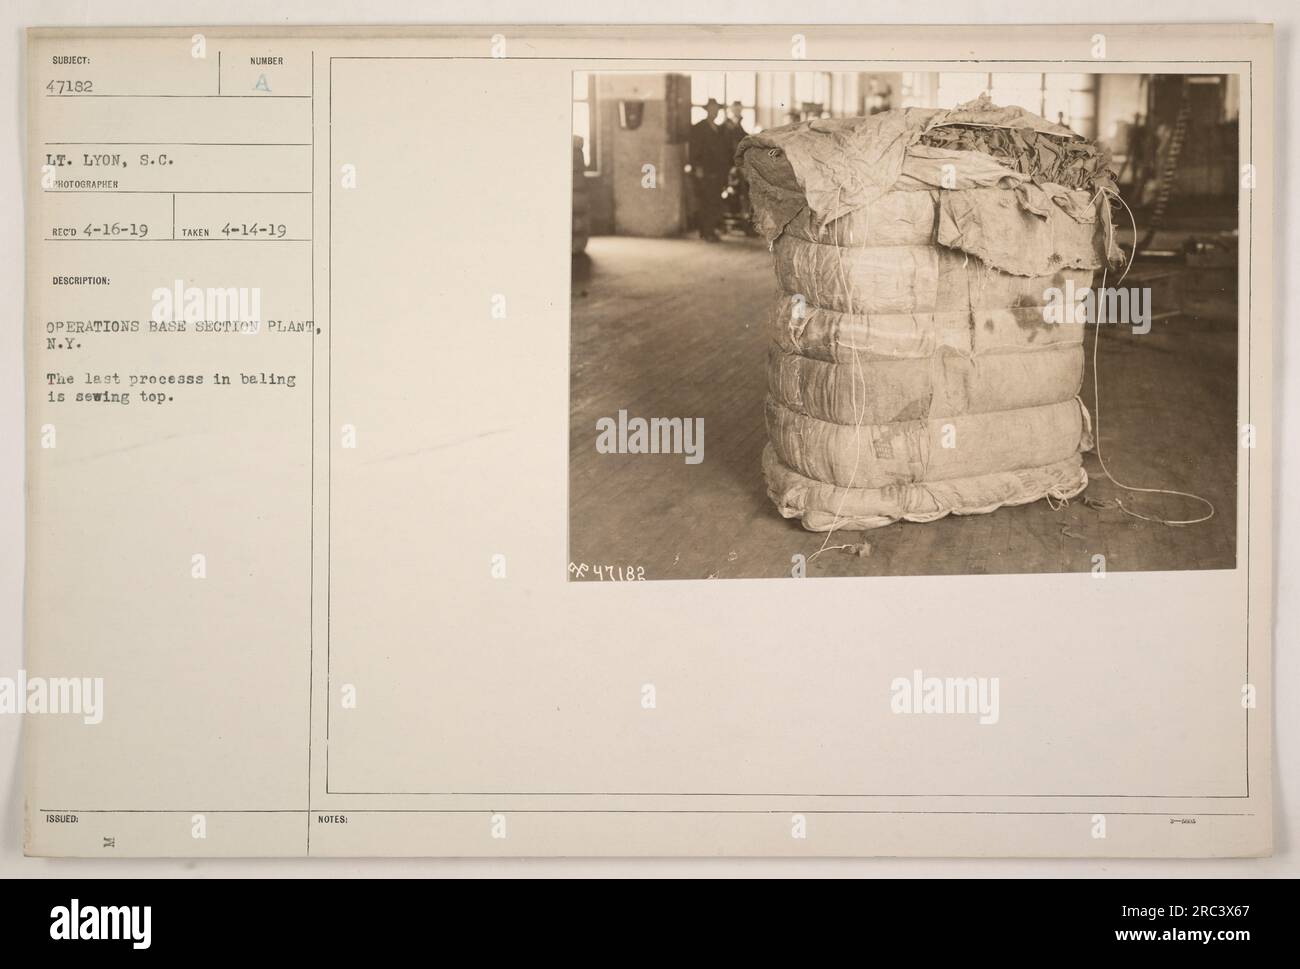 Baling process at Operations Base Section Plant in New York. The final step involves sewing the top of the bale. The photograph was taken on April 14, 1919 by Lt. Lyon, S.C. The image is assigned the number 47182 and was released with issued notes. Stock Photo